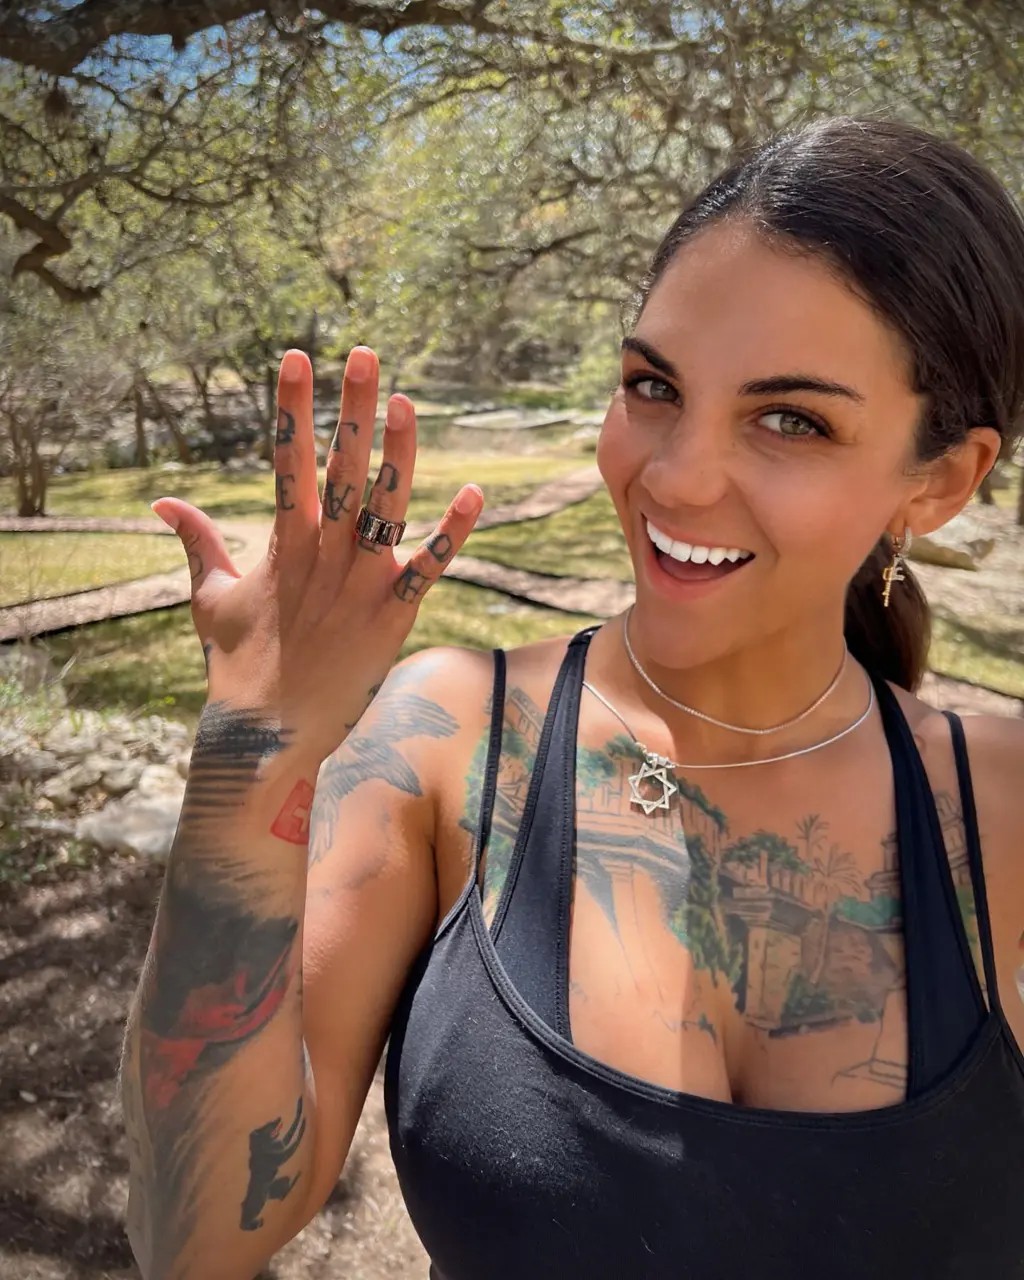 Jesse James marries former porn actress Bonnie Rotten (Alaina Hicks) after proposing to her in April (Photo: Playback/Instagram)